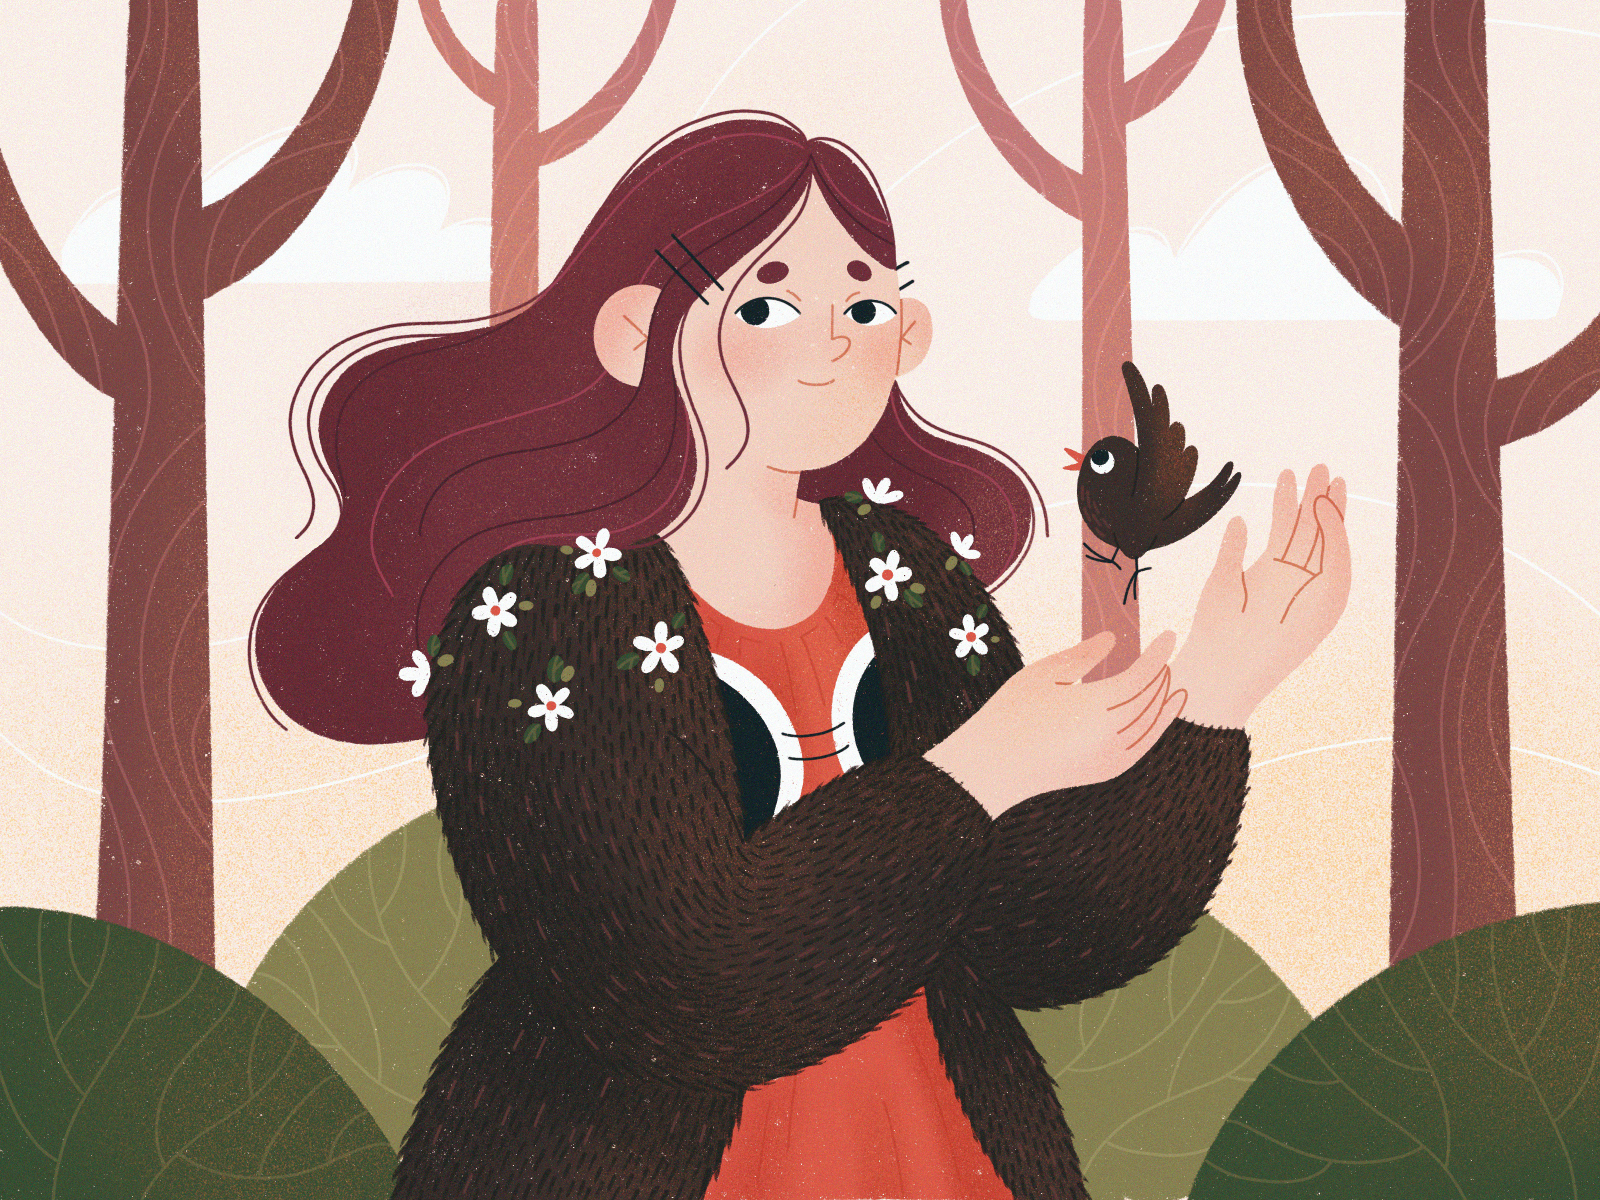 Girl from the woods by Tanya Shibalkova on Dribbble